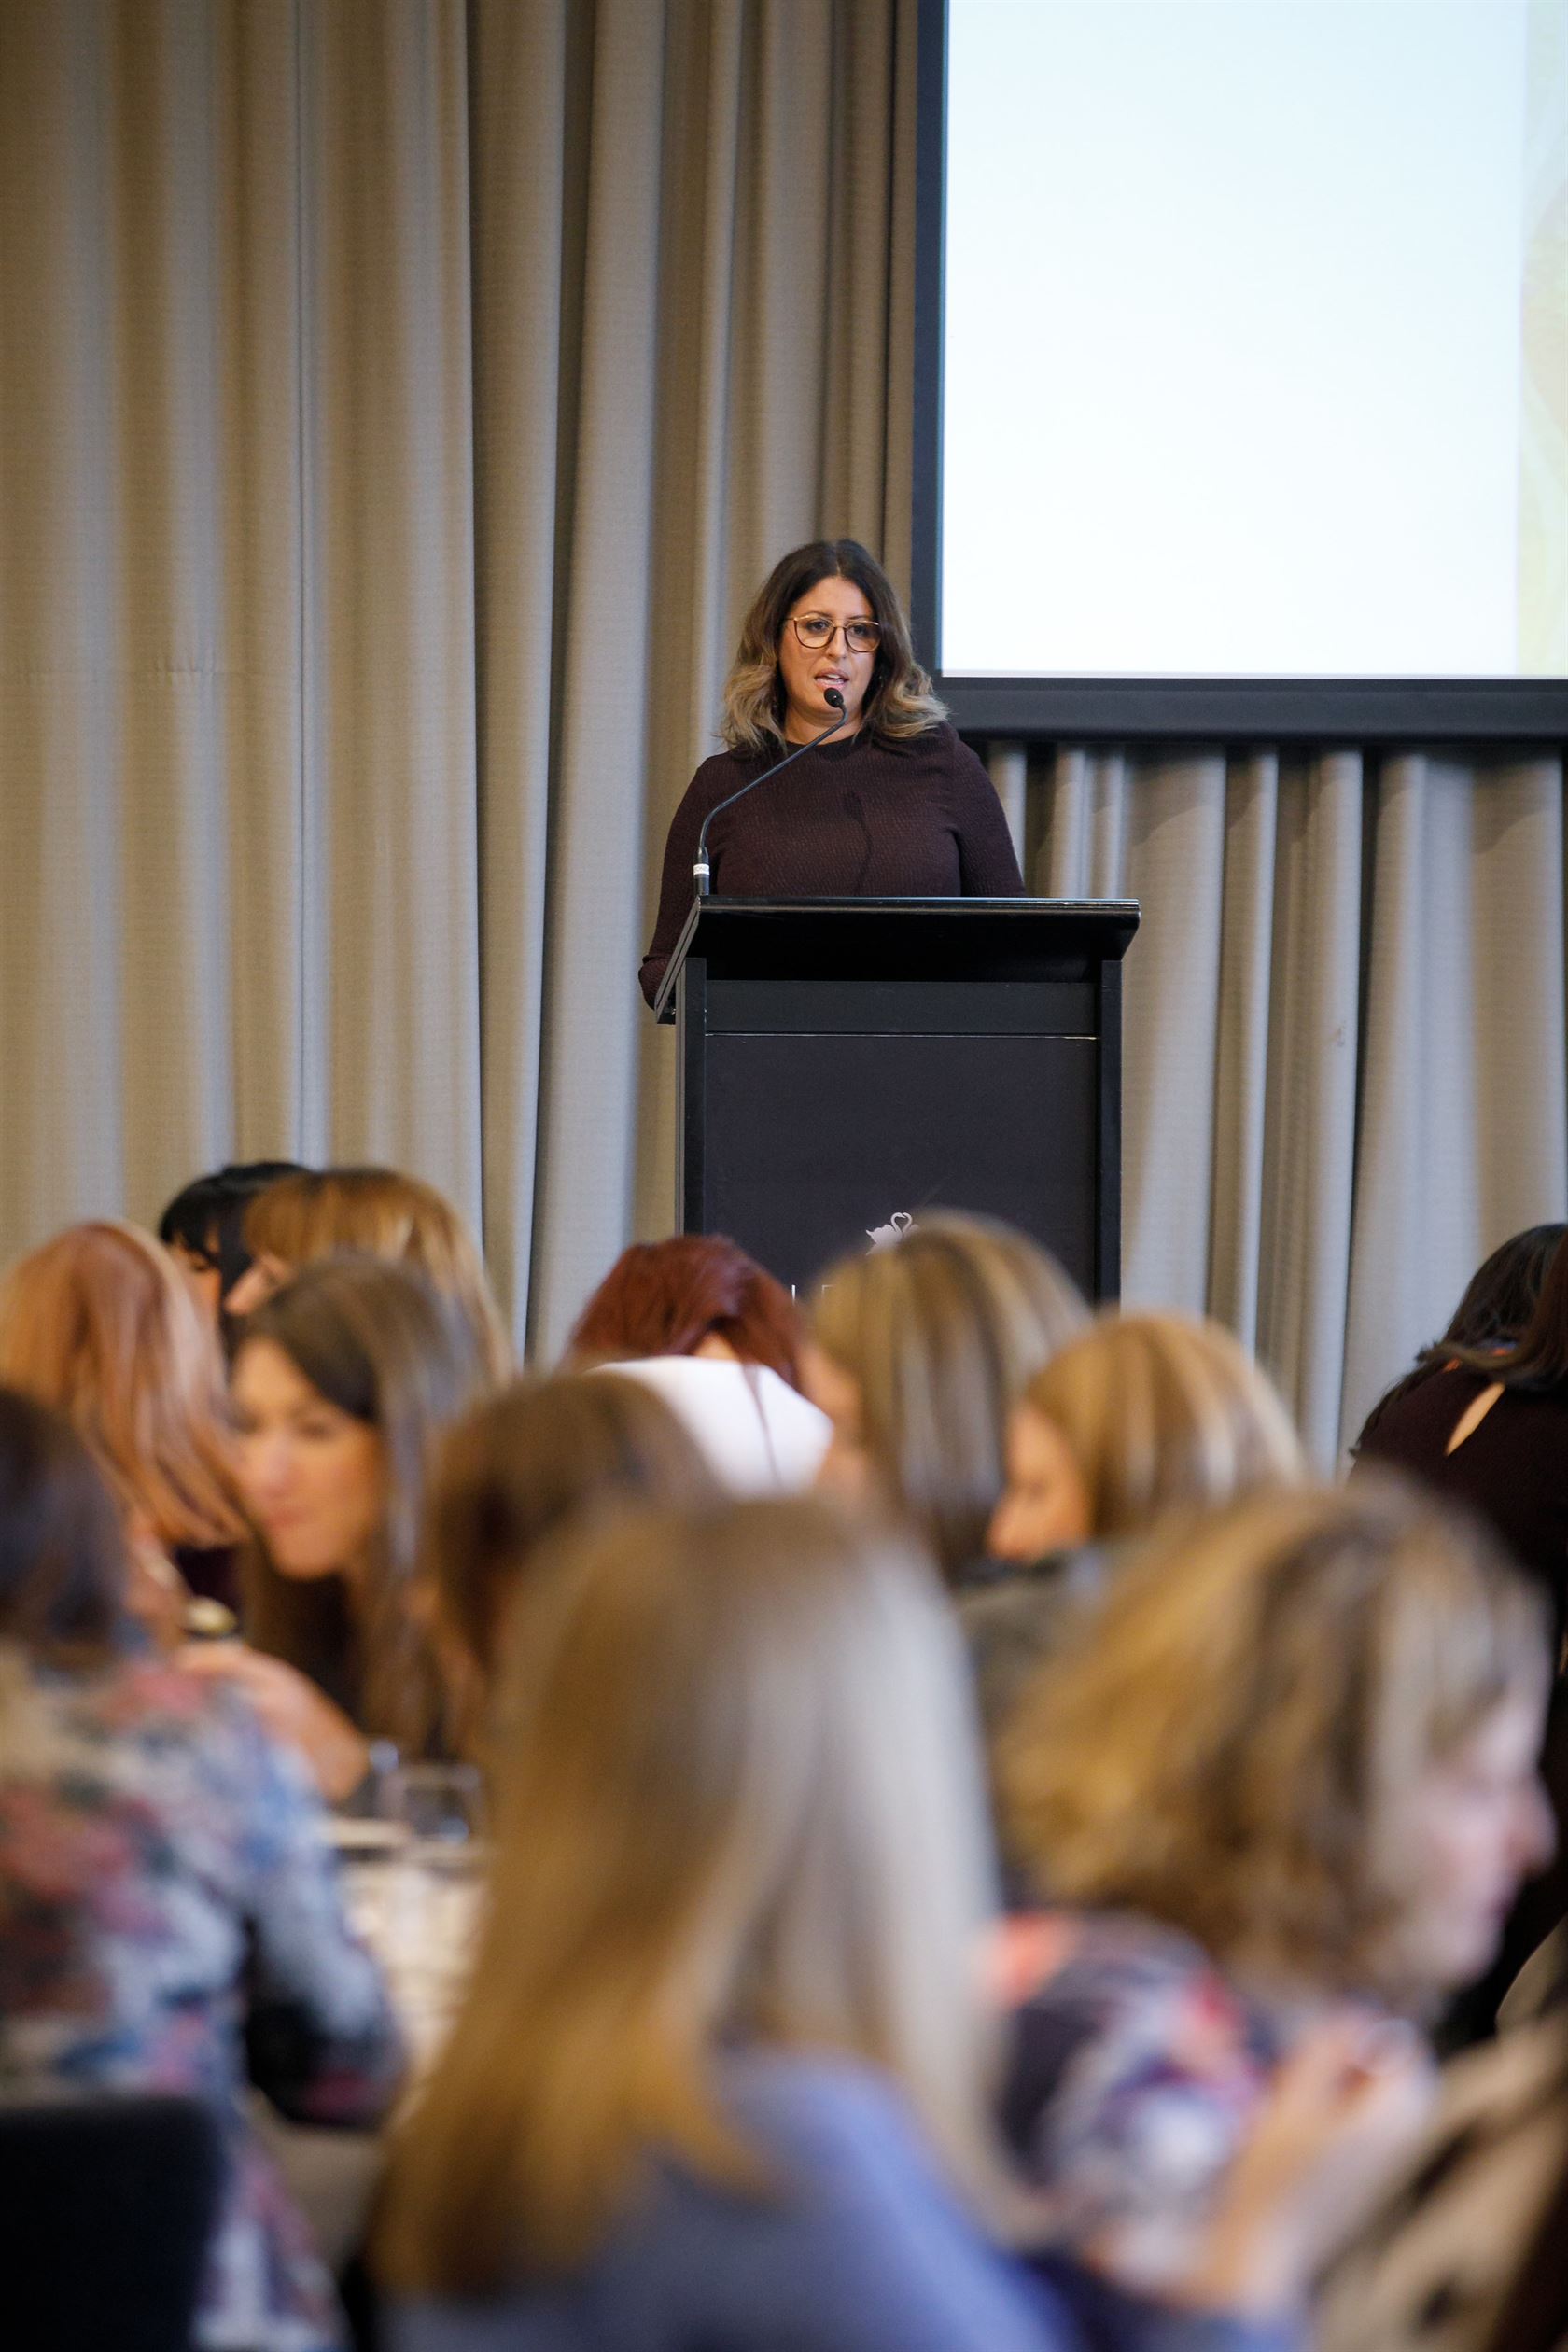 A woman confidently presenting at a conference in Melbourne. She captivates the audience with her engaging presentation skills.